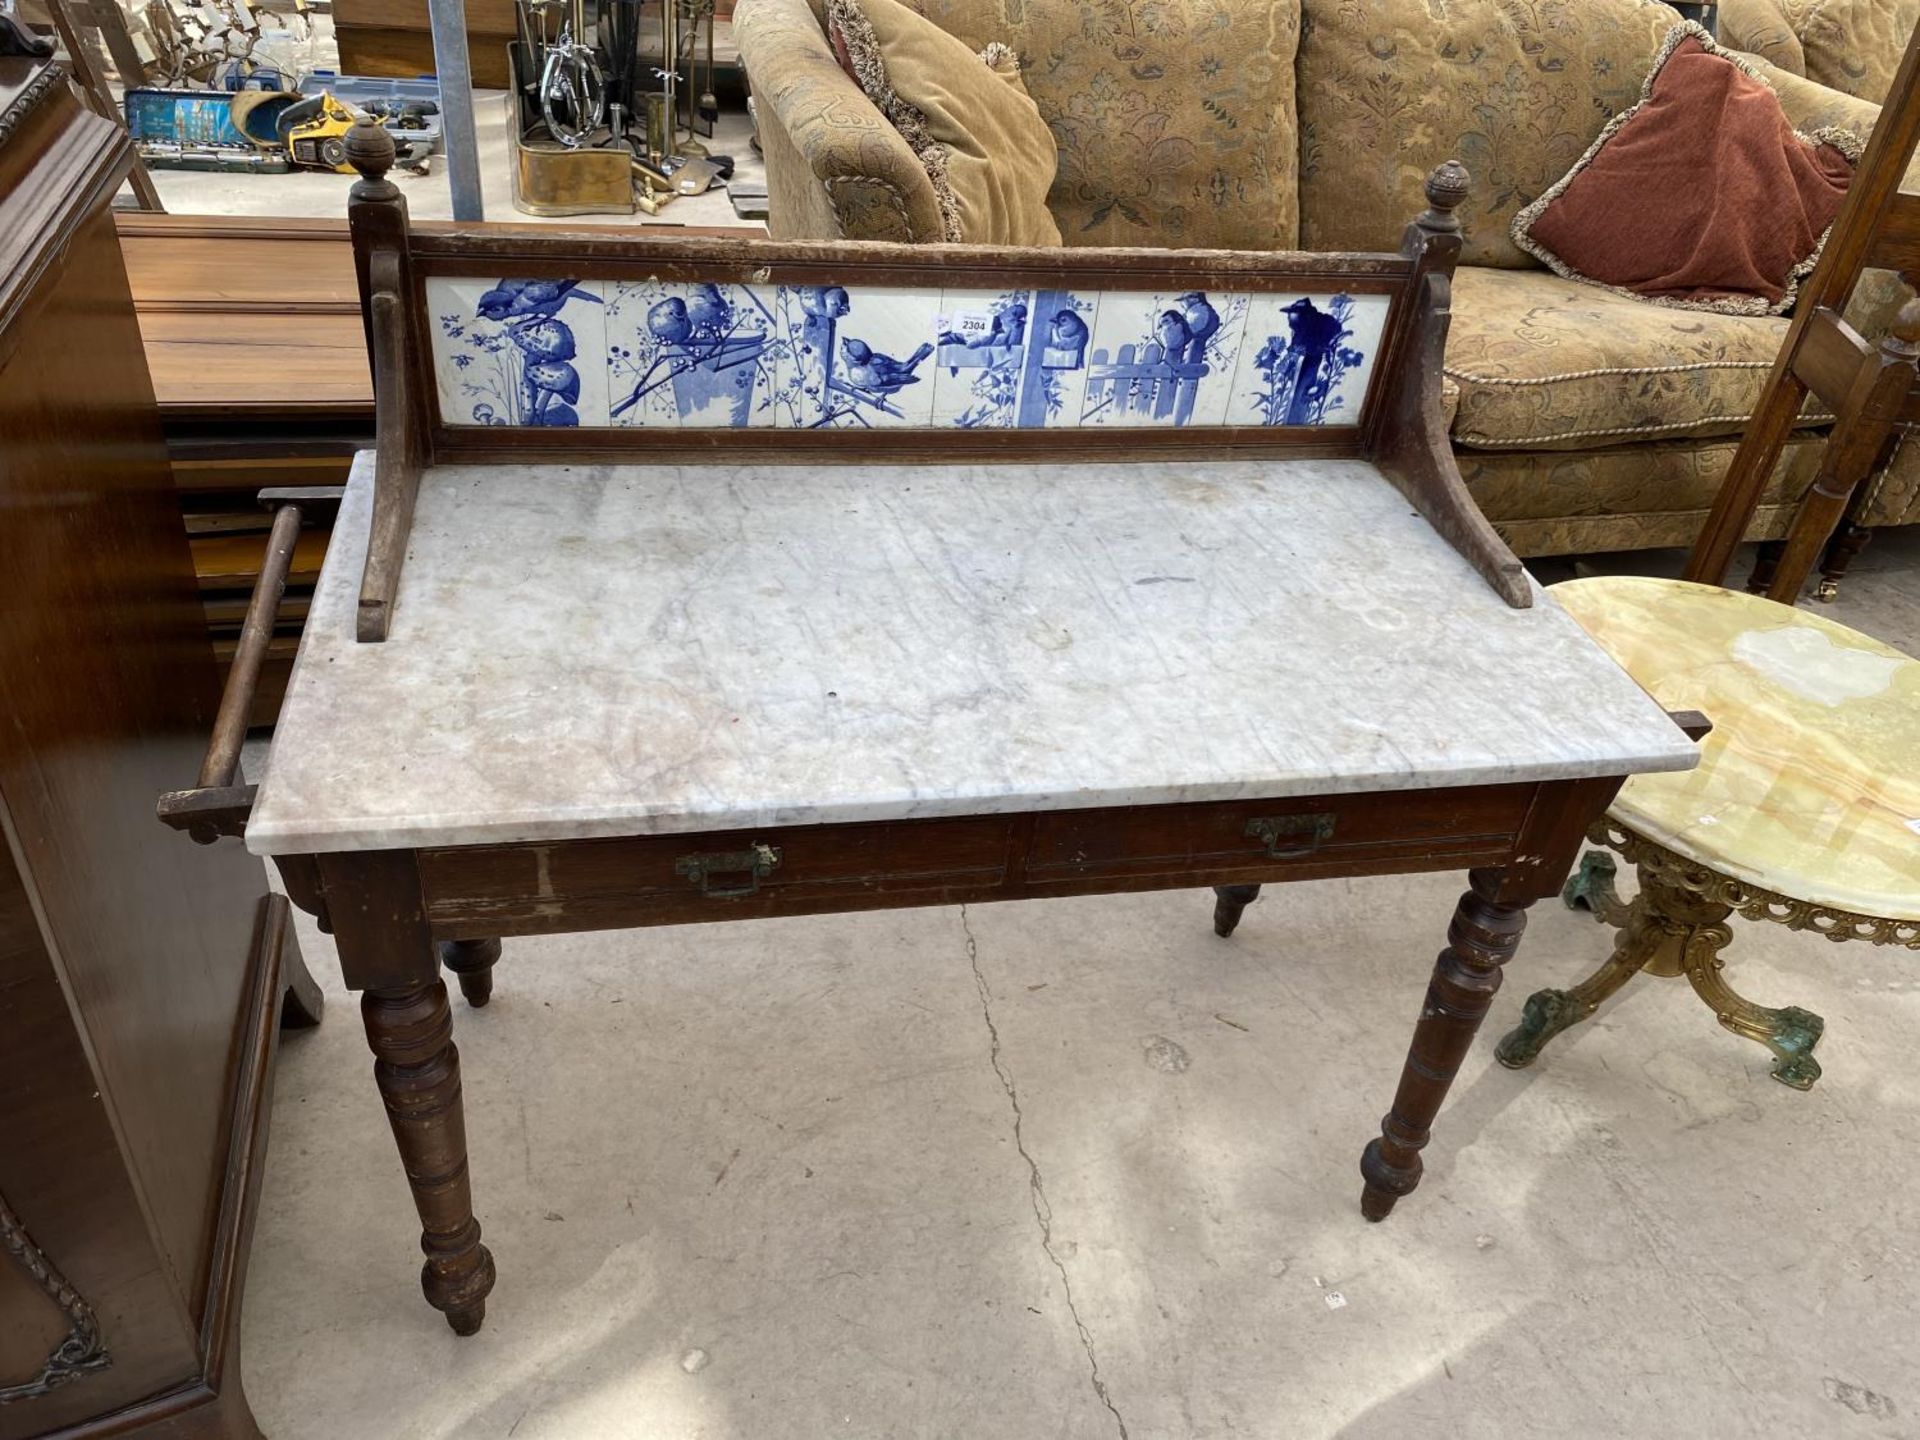 A VICTORIAN MARBLE TOPPED WASH STAND WITH TILED BACK 47" WIDE